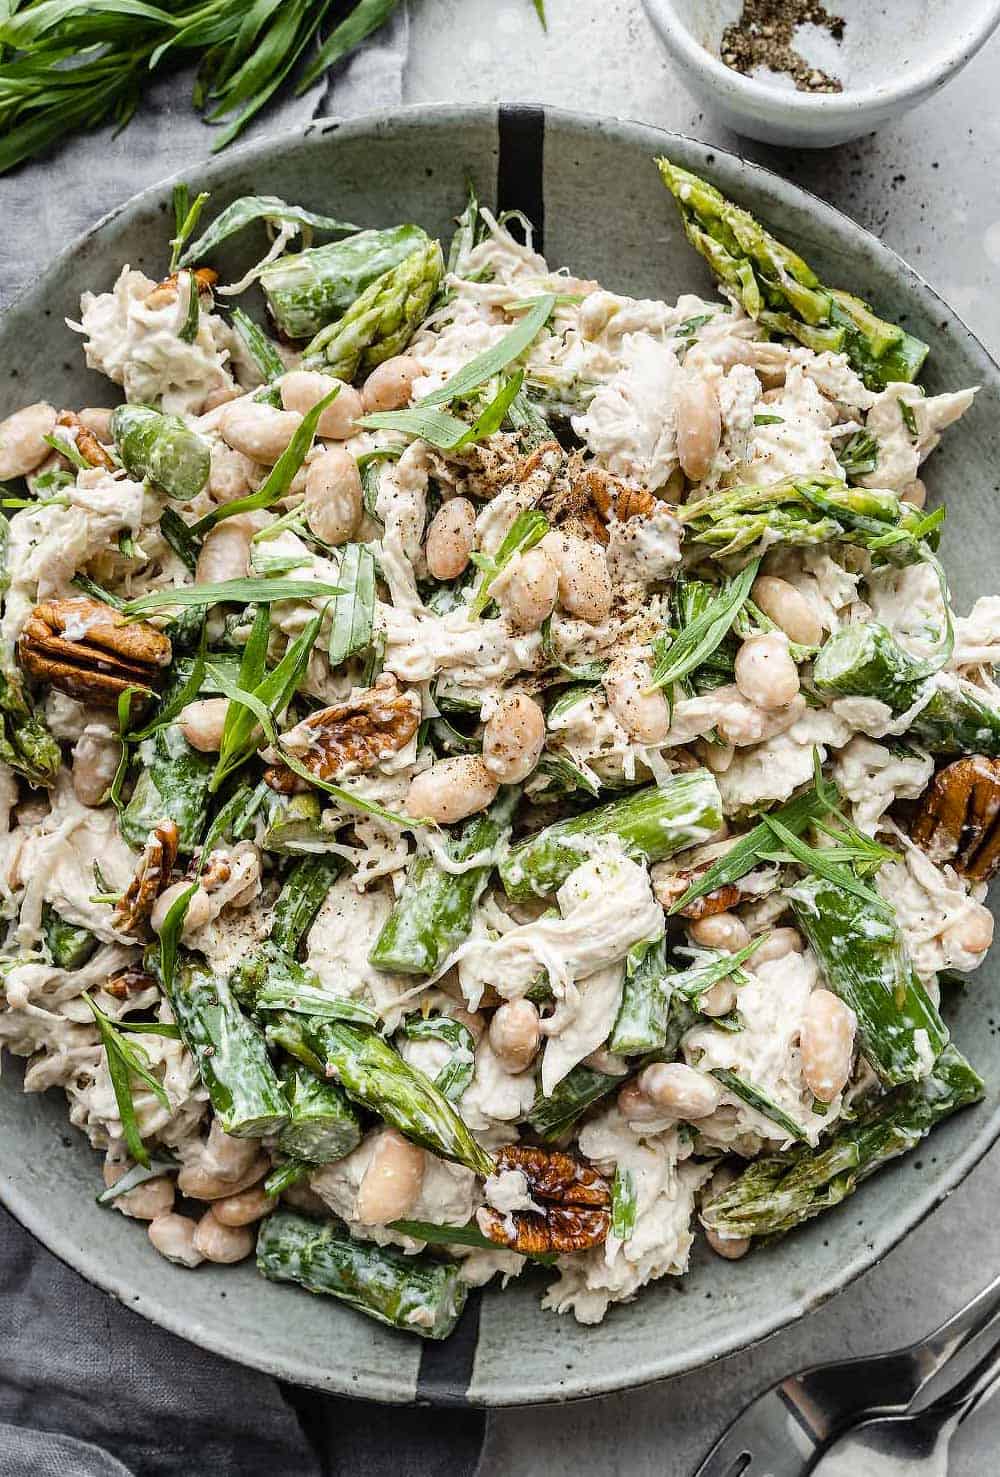 Tarragon Chicken Salad in a grey bowl: Shredded chicken mixed with asparagus, beans, nuts, and tarragon leaves, coated in a creamy dressing.